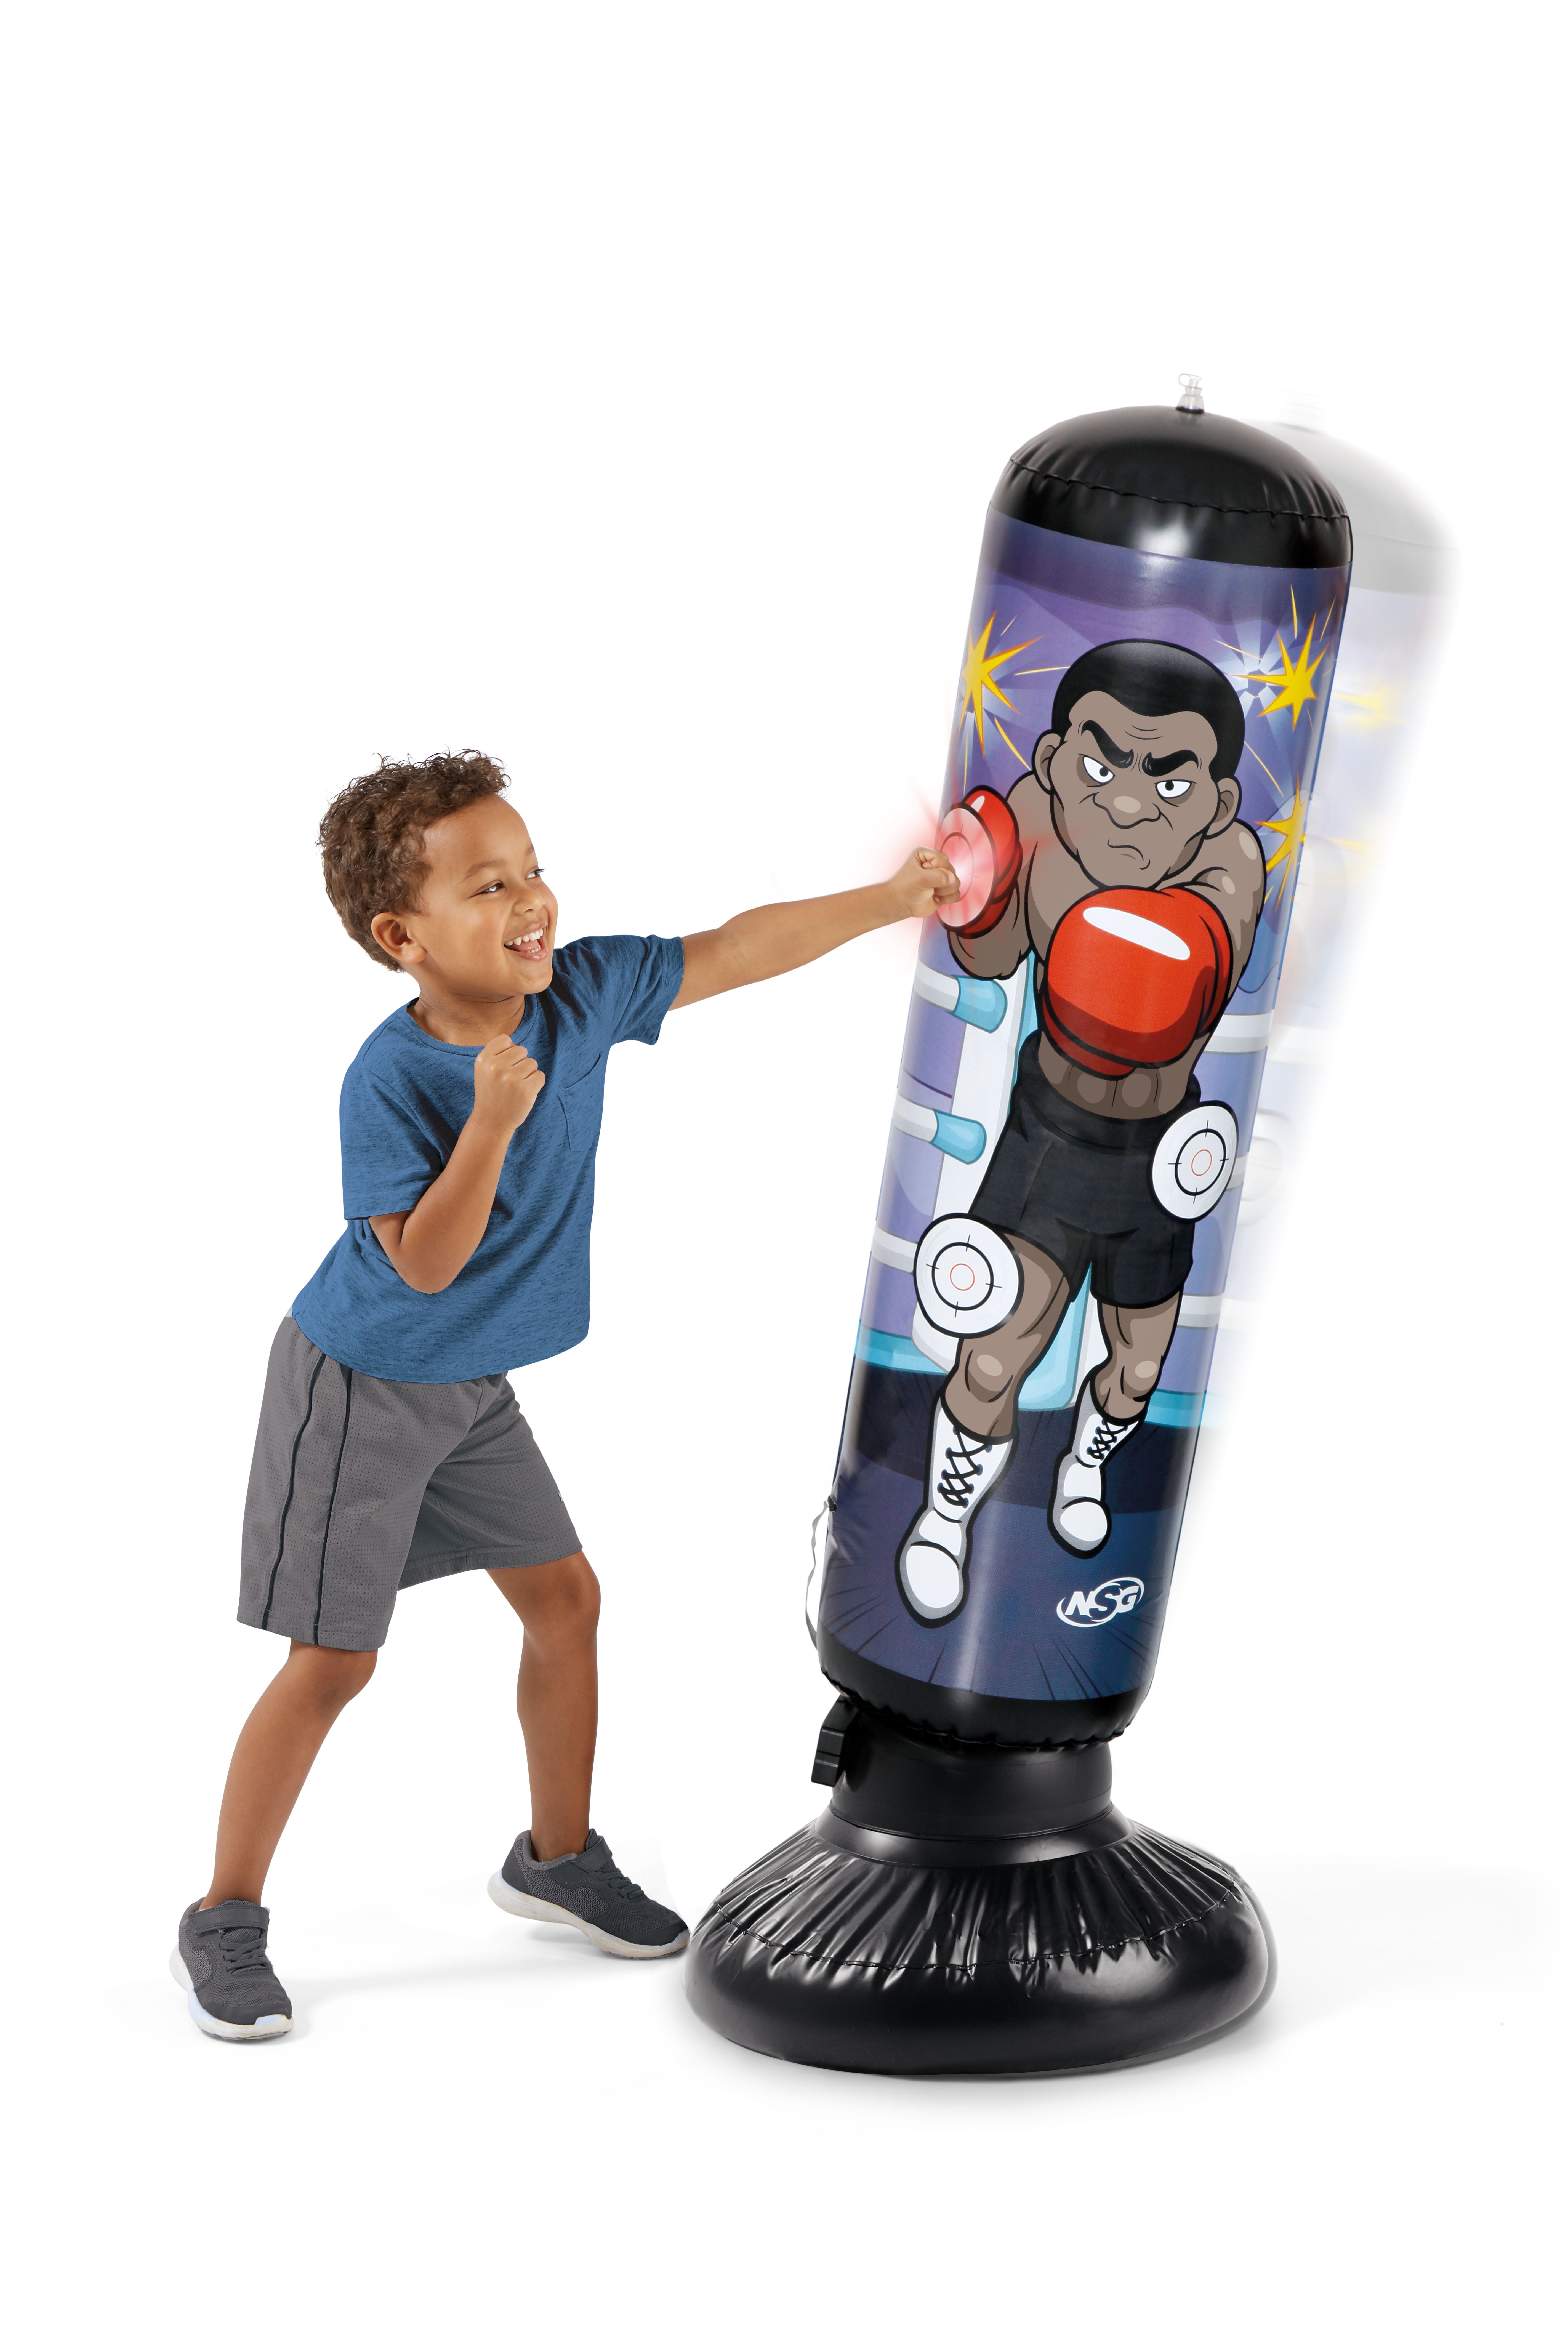 NSG Junior Electronic Weighted Kickboxing Punch Bag with LED Lights and  Sounds 